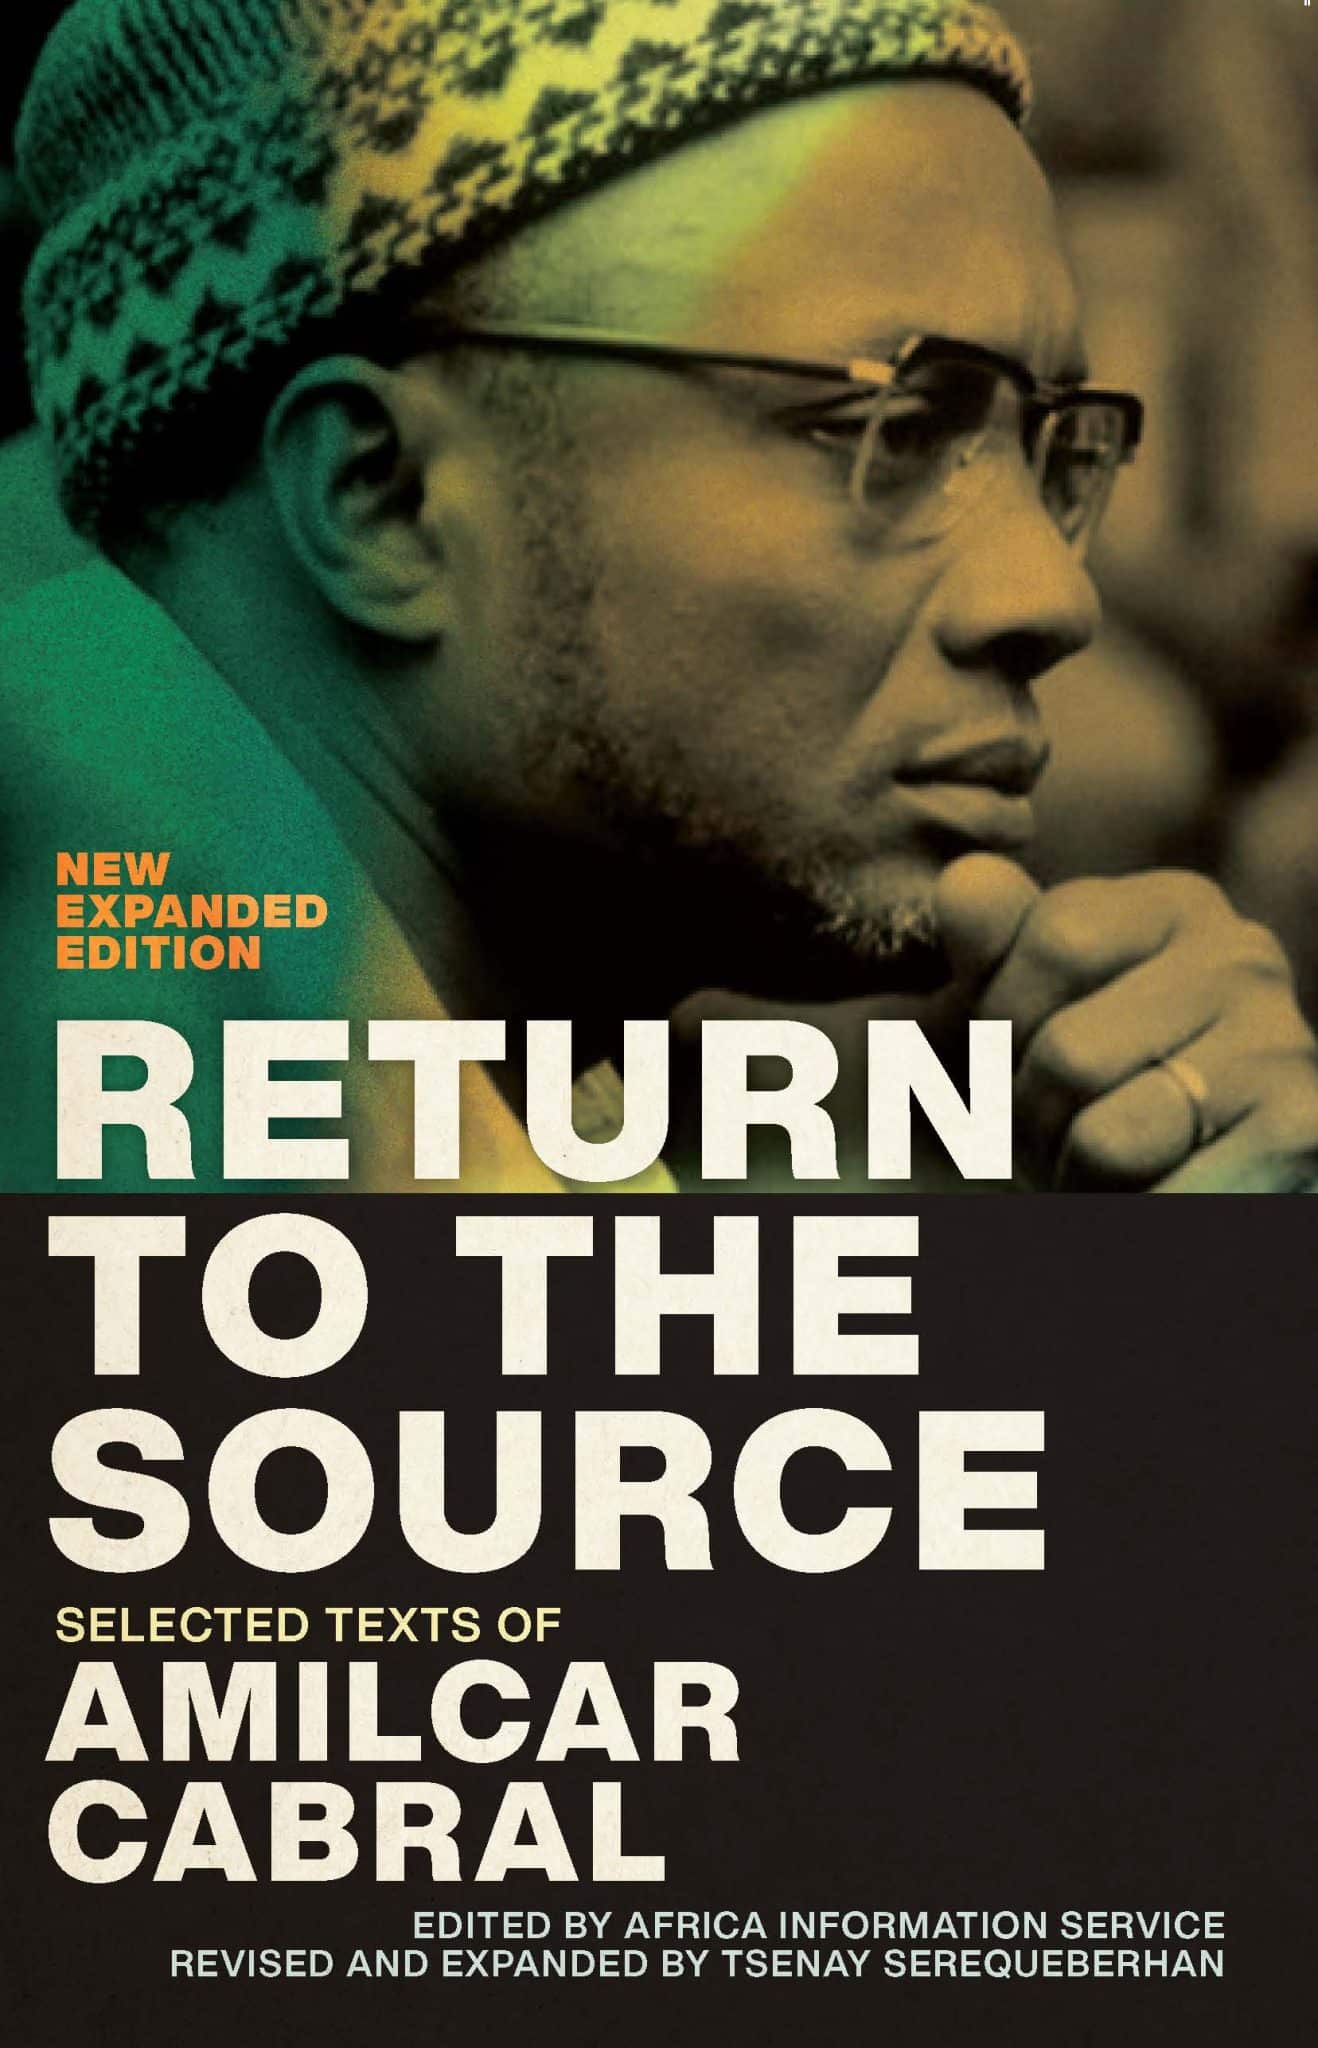 Return to the Source: Selected Texts of Amilcar Cabral, New Expanded Edition (Paperback)